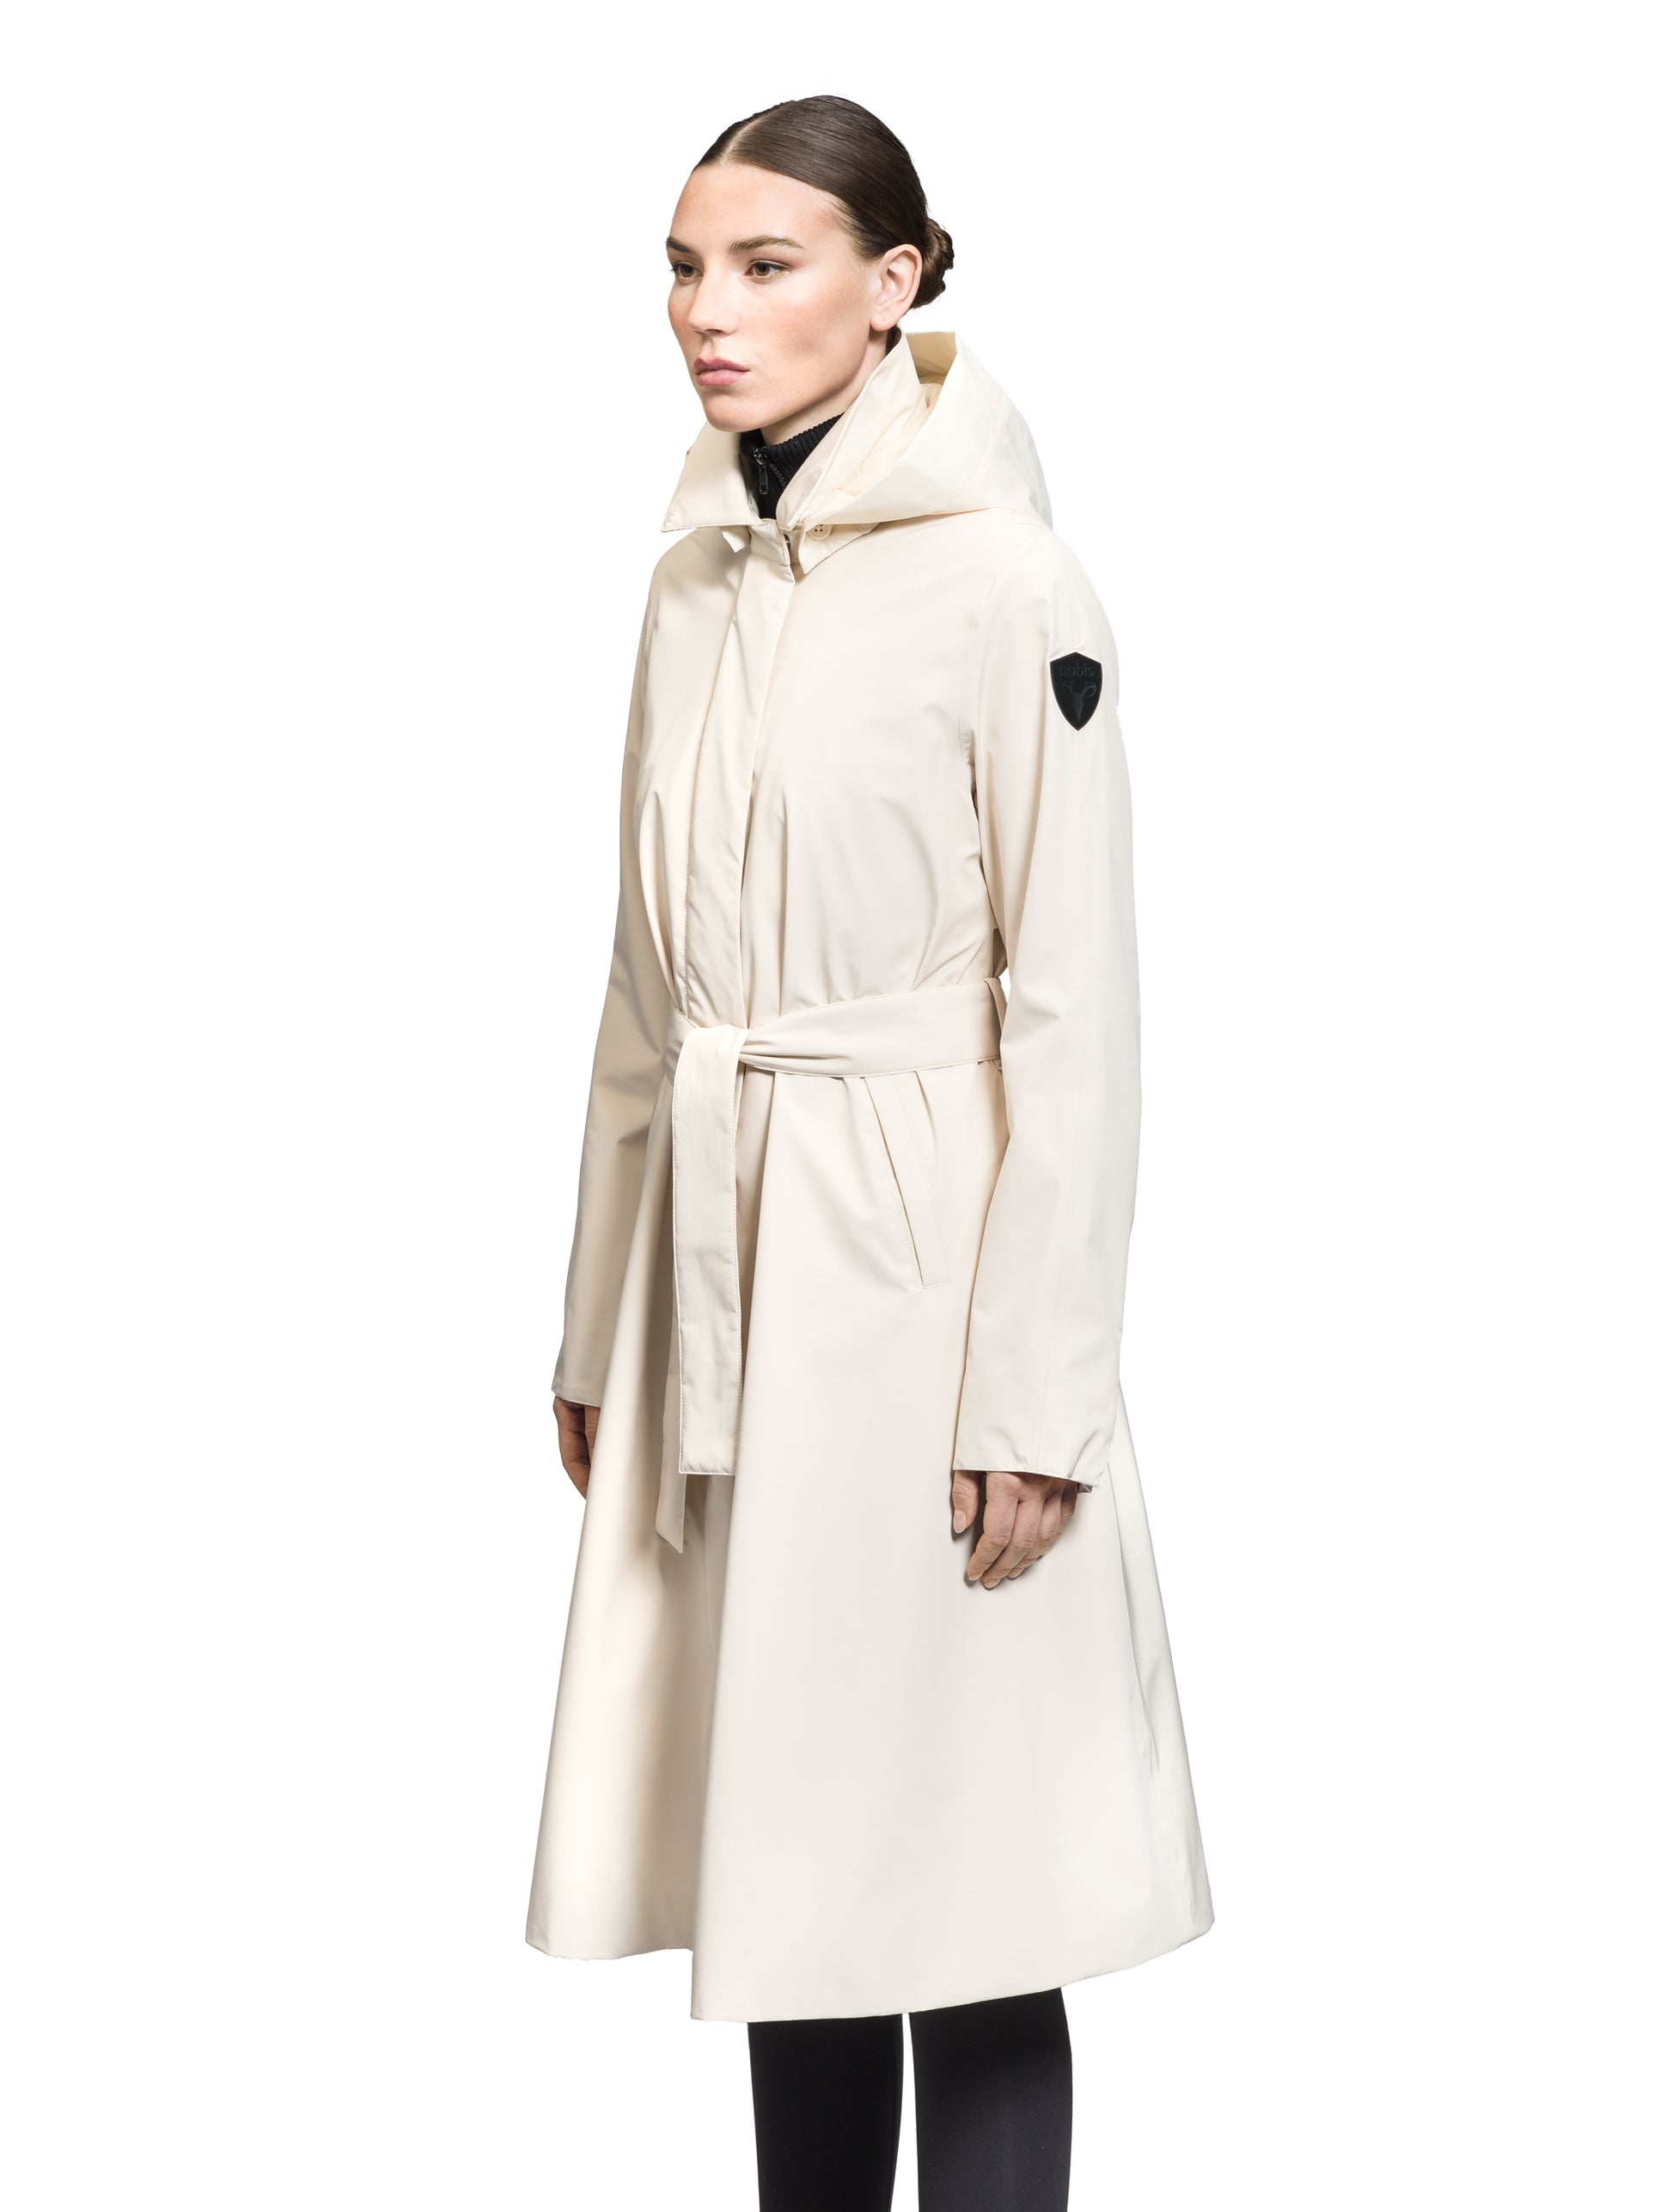 Ivy Ladies Tailored Trench Coat in knee length, 3-Ply Micro Denier fabrication, retractable non-removable hood, front wind flap with snap button closure, removable belt, and adjustable snap cuffs, in Wheat